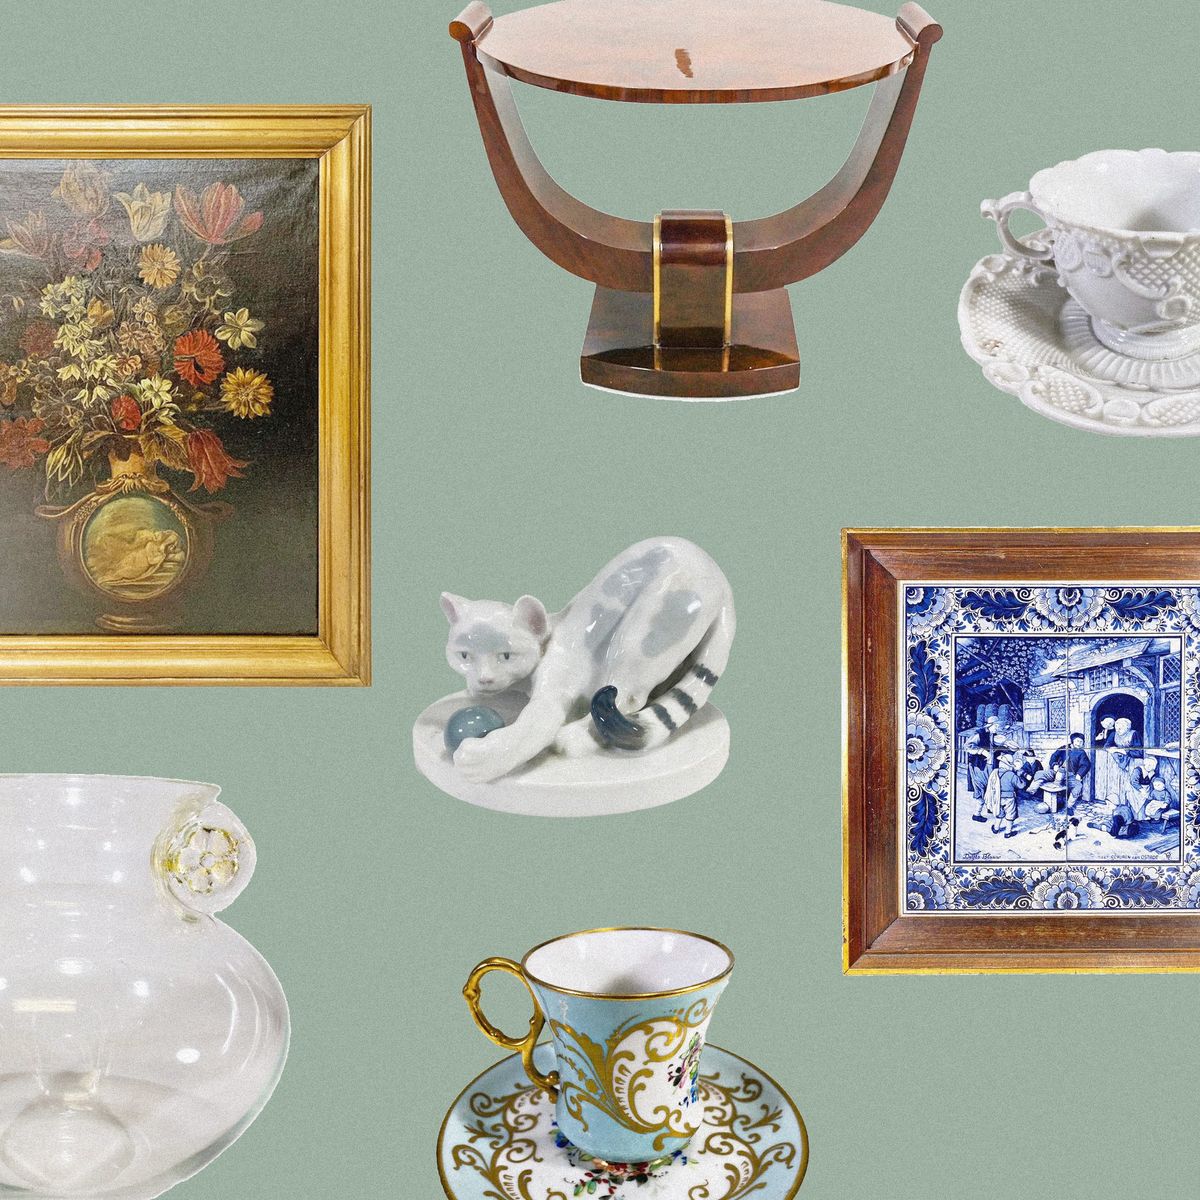 This $1 Live Antique Auction Is the Shopping Event of Our Dreams